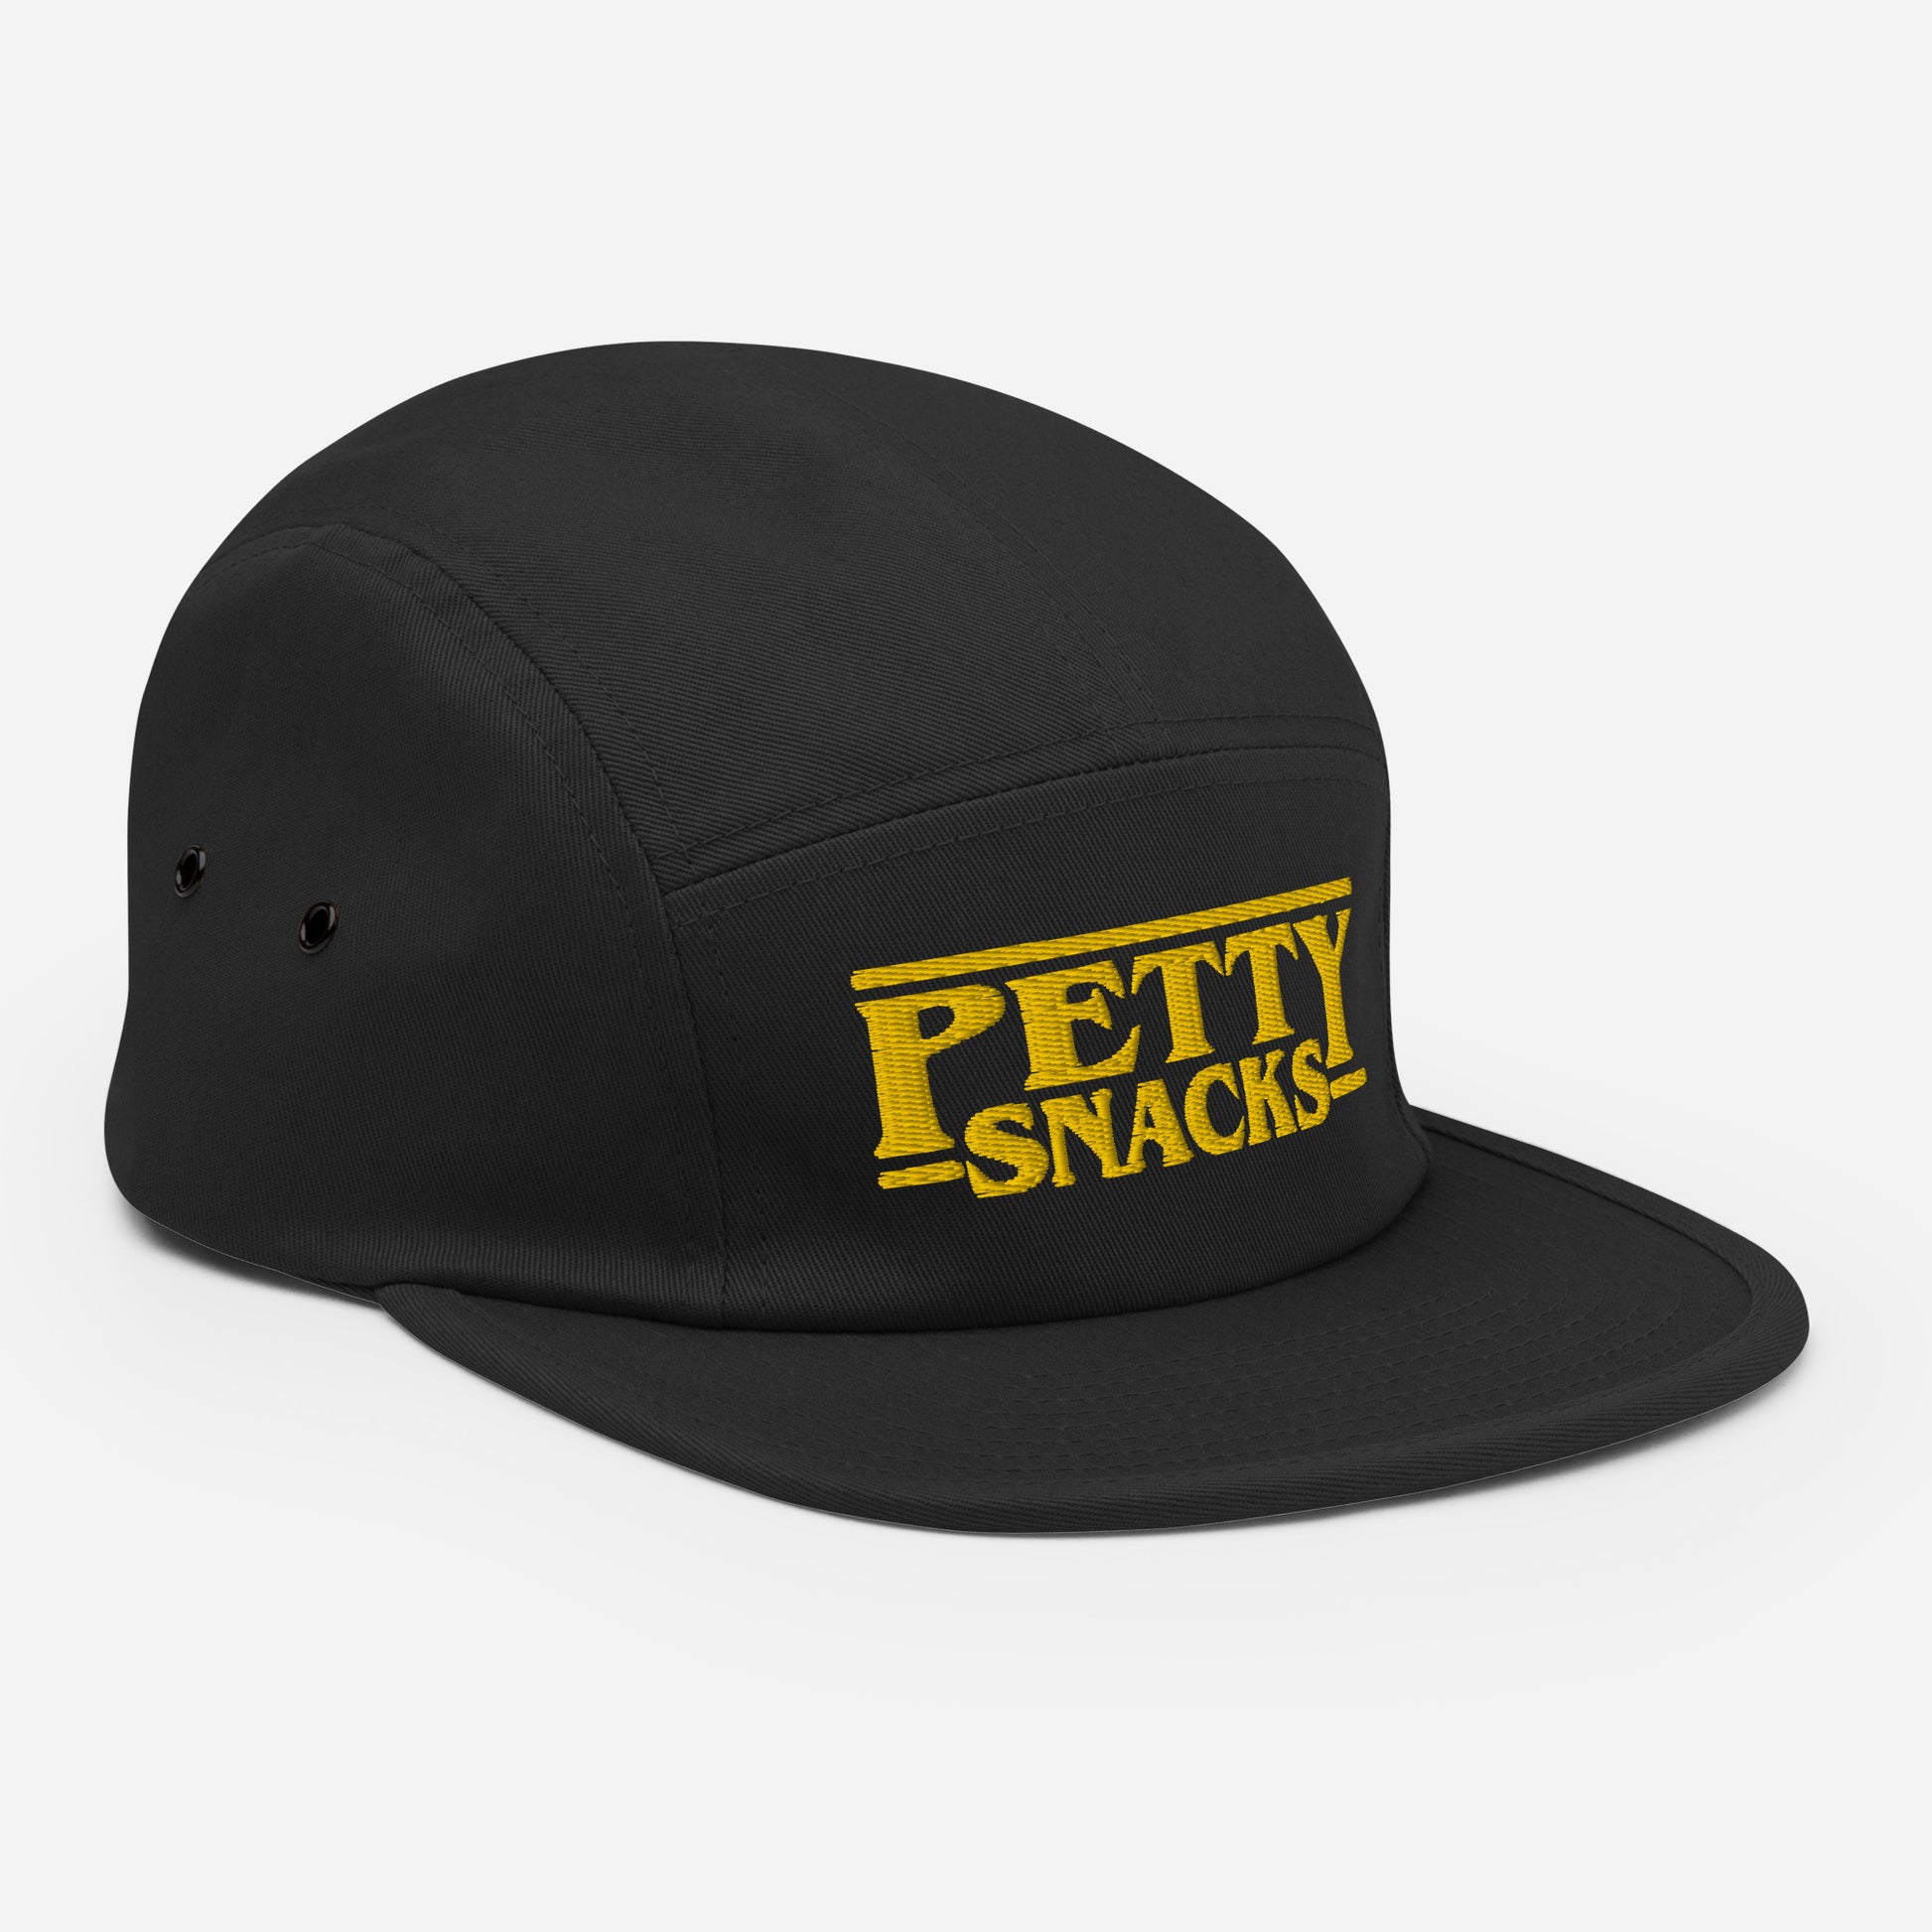 Side view of a black five-panel hat with embroidered lettering in front center. Letterings says "Petty Snacks" in yellow with a line on top and bottom of the words. In the style of film credits made famous by Tarantino.